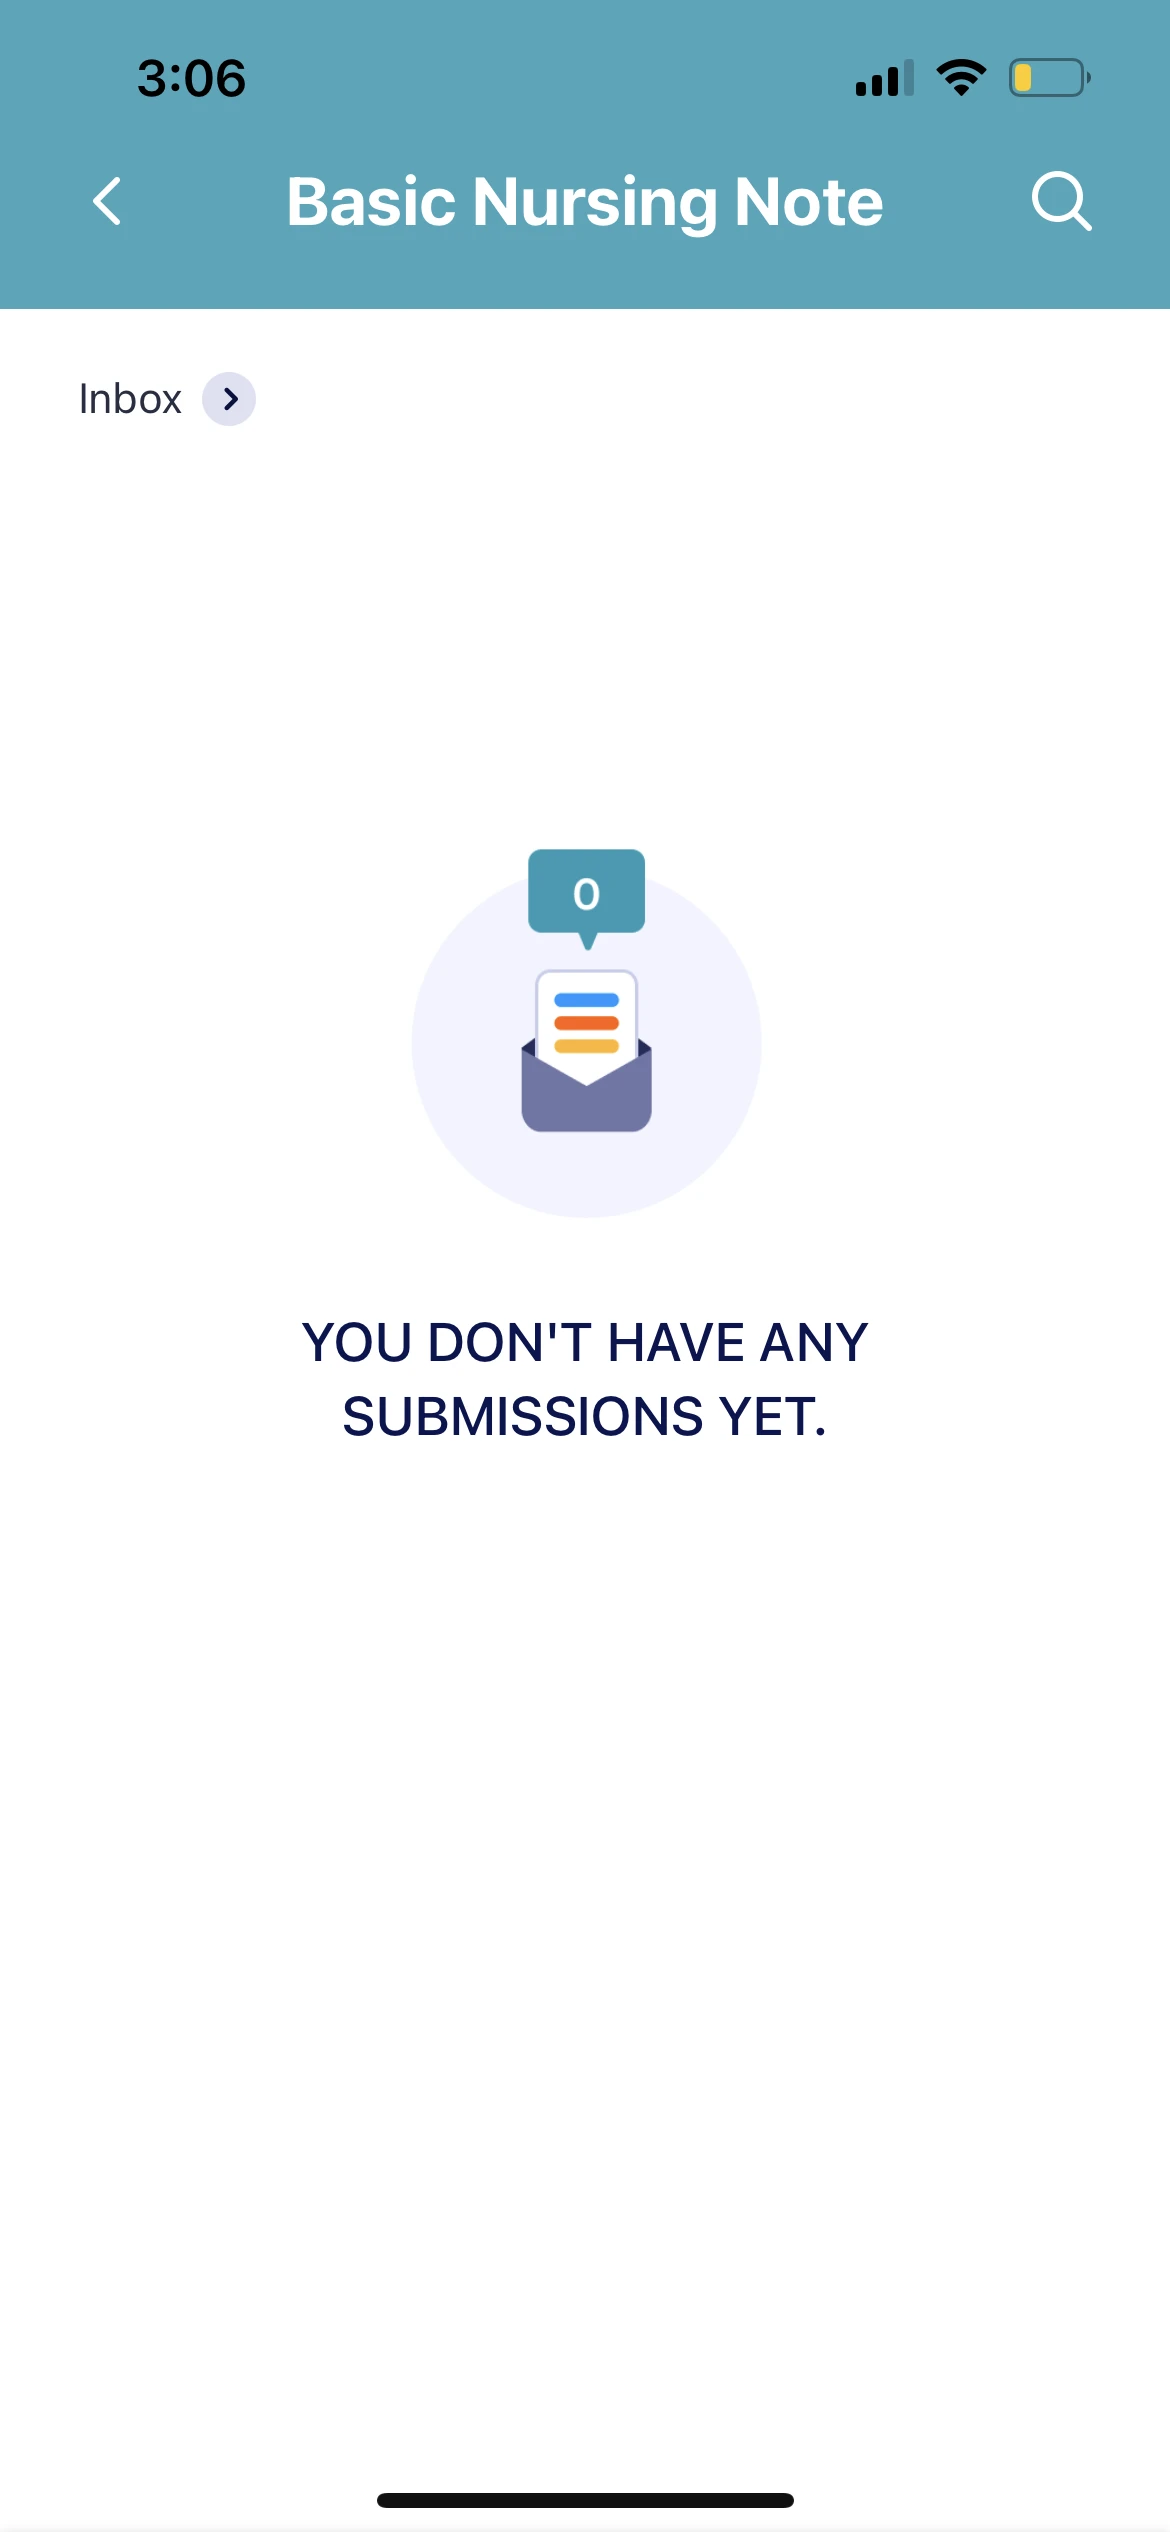 Unable to see submission Screenshot 30